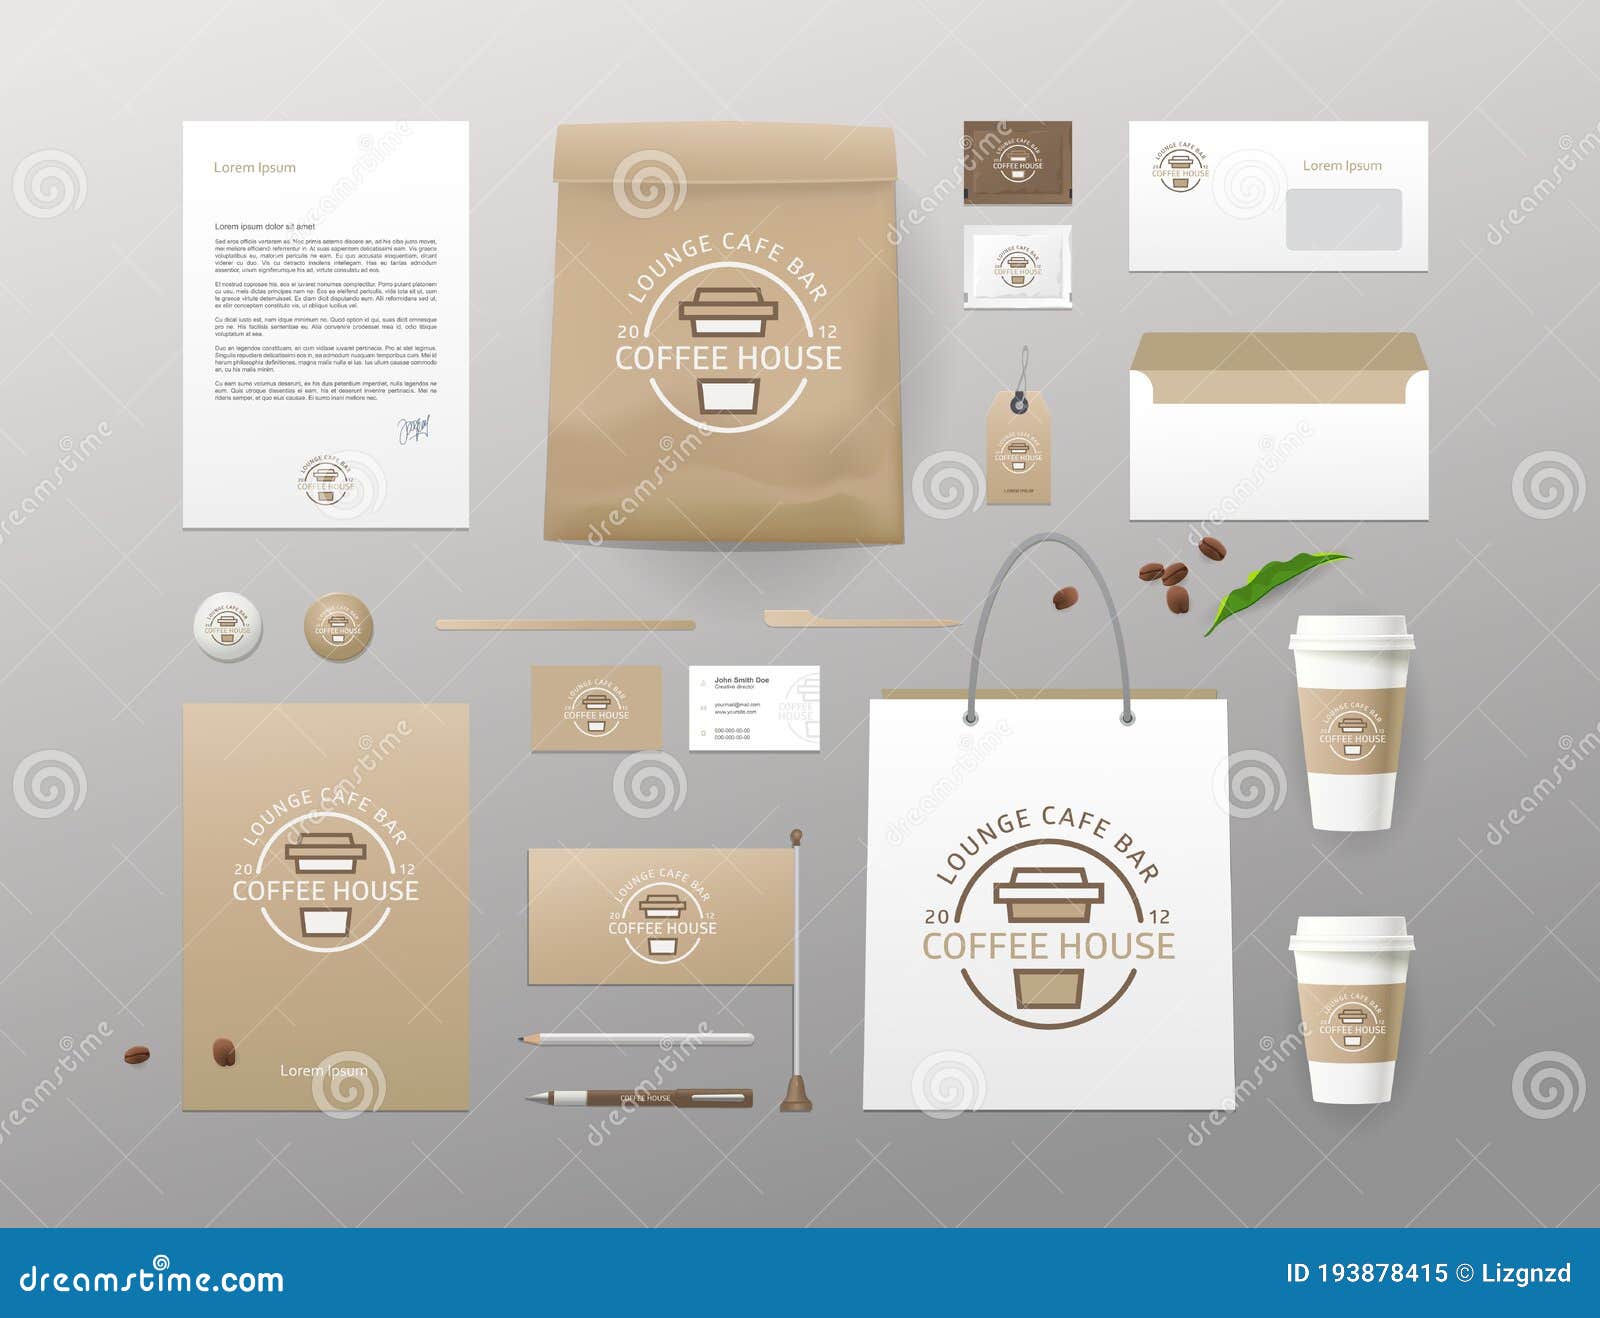 Download Corporate Identity Template. Business Set For Coffee Shop, Cafe, Restaurant. Branding MockUps ...